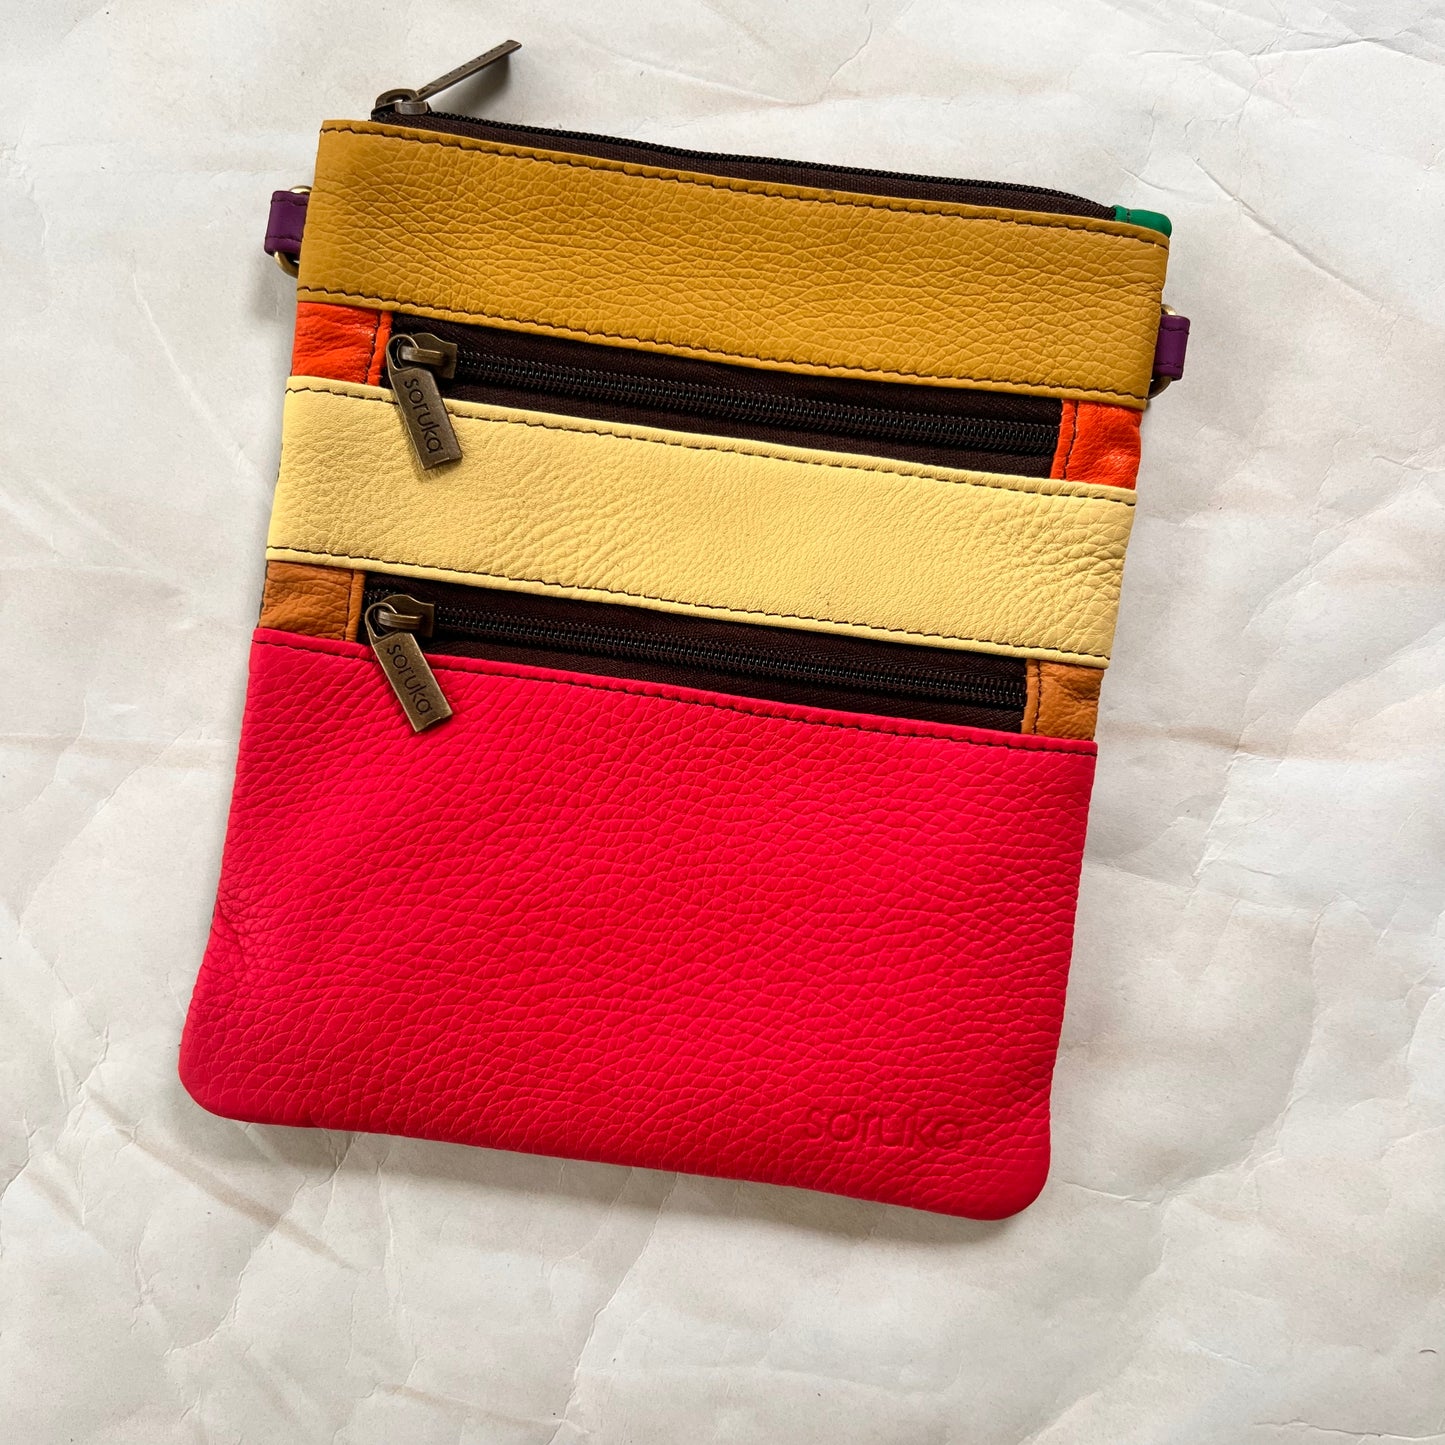 flat rectangular maya bag with top zipper and 2 zipper pockets color blocked in pink and yellows.